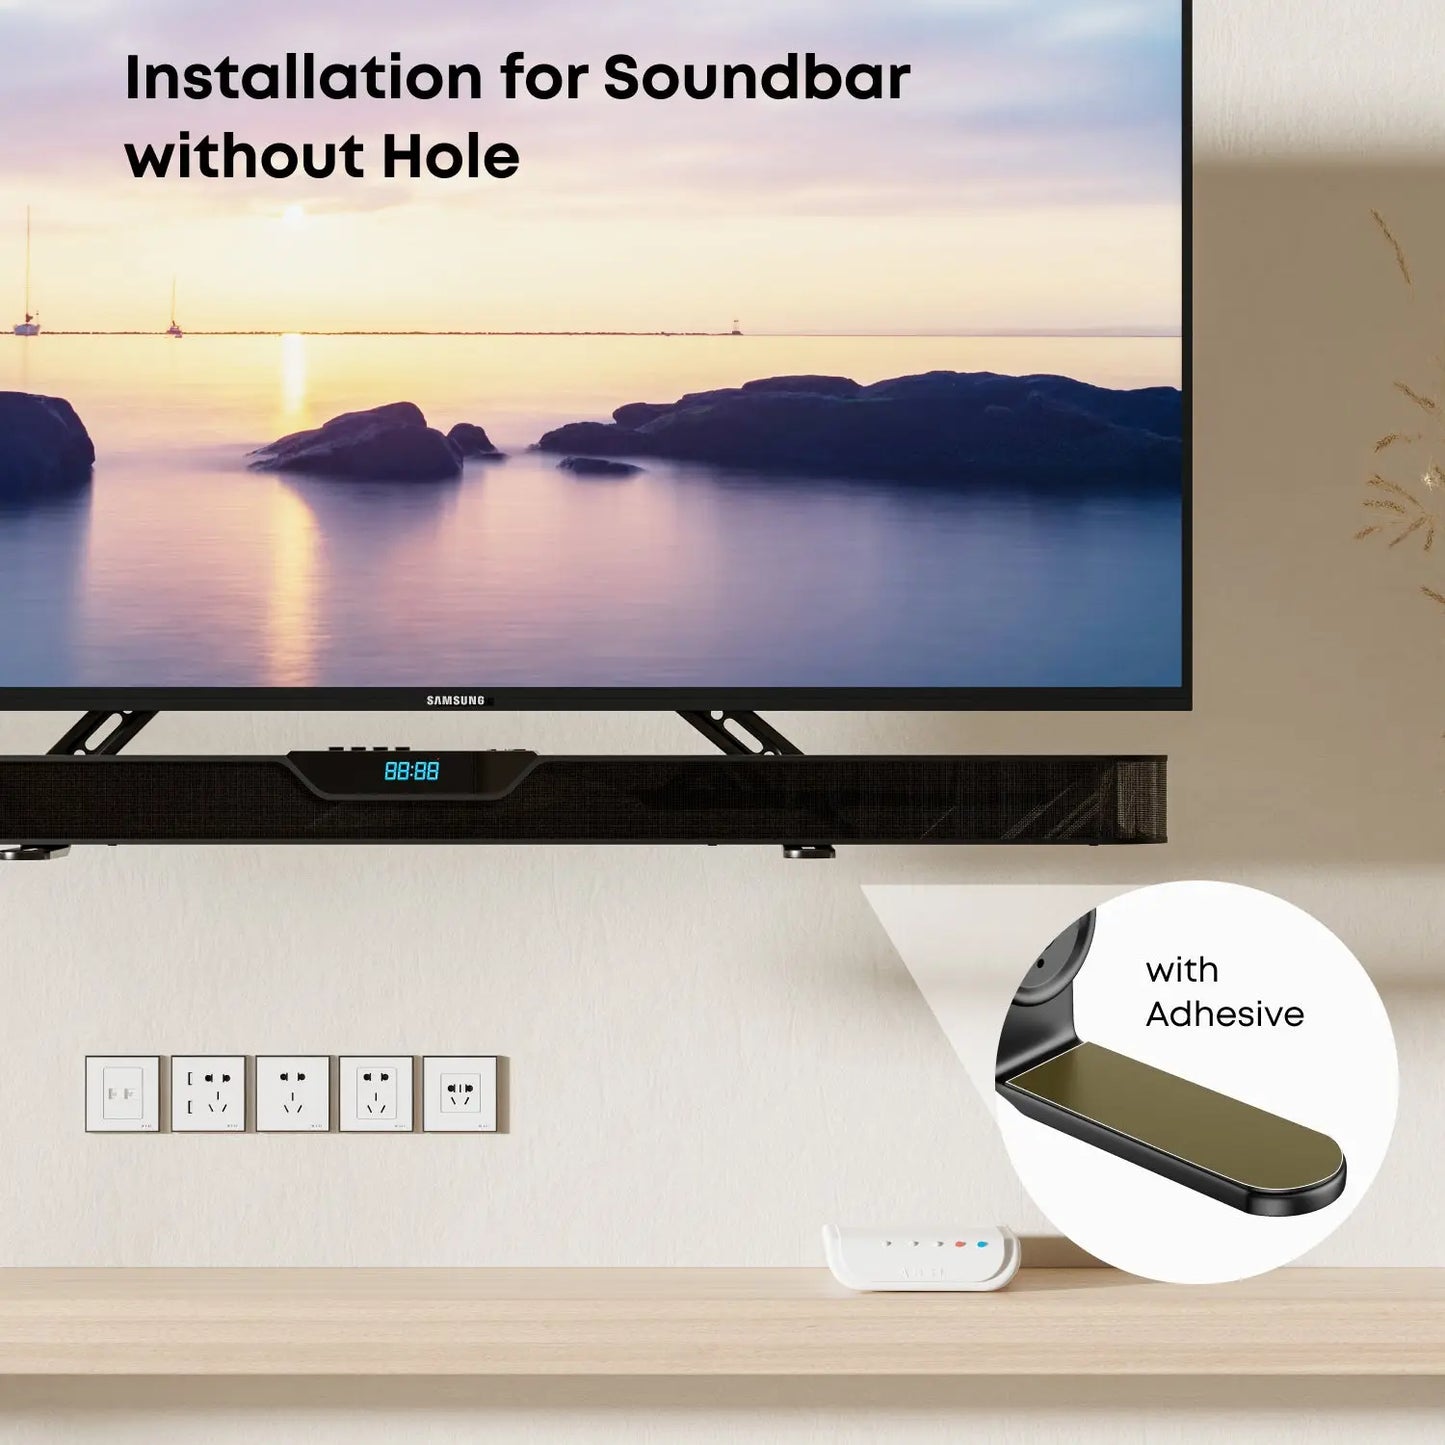 PUTORSEN Soundbar Mount Bracket for Mounting Under or Above TV, Fits Most Sound Bars Up to 33 Lbs, for Max 90'' TV, with 3 Extension Arms and 1 L-Brackets PUTORSEN